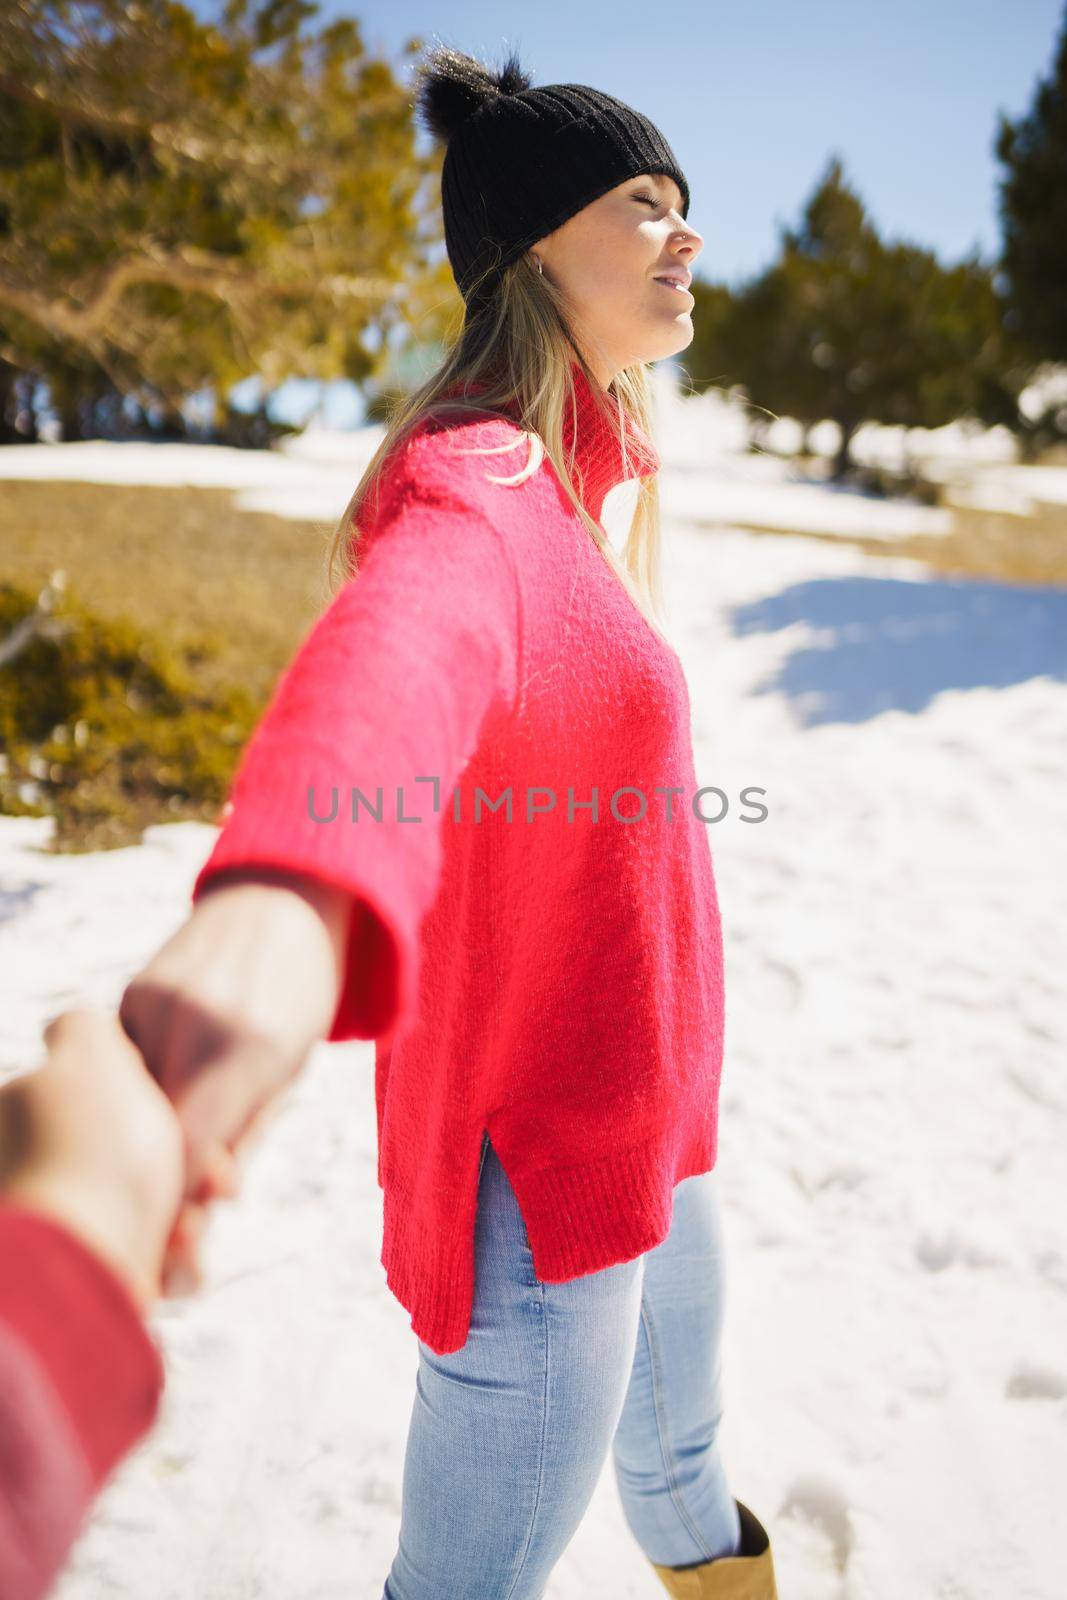 Blonde woman in winter clothes walking holding her partner's hand in the snowy mountains. by javiindy